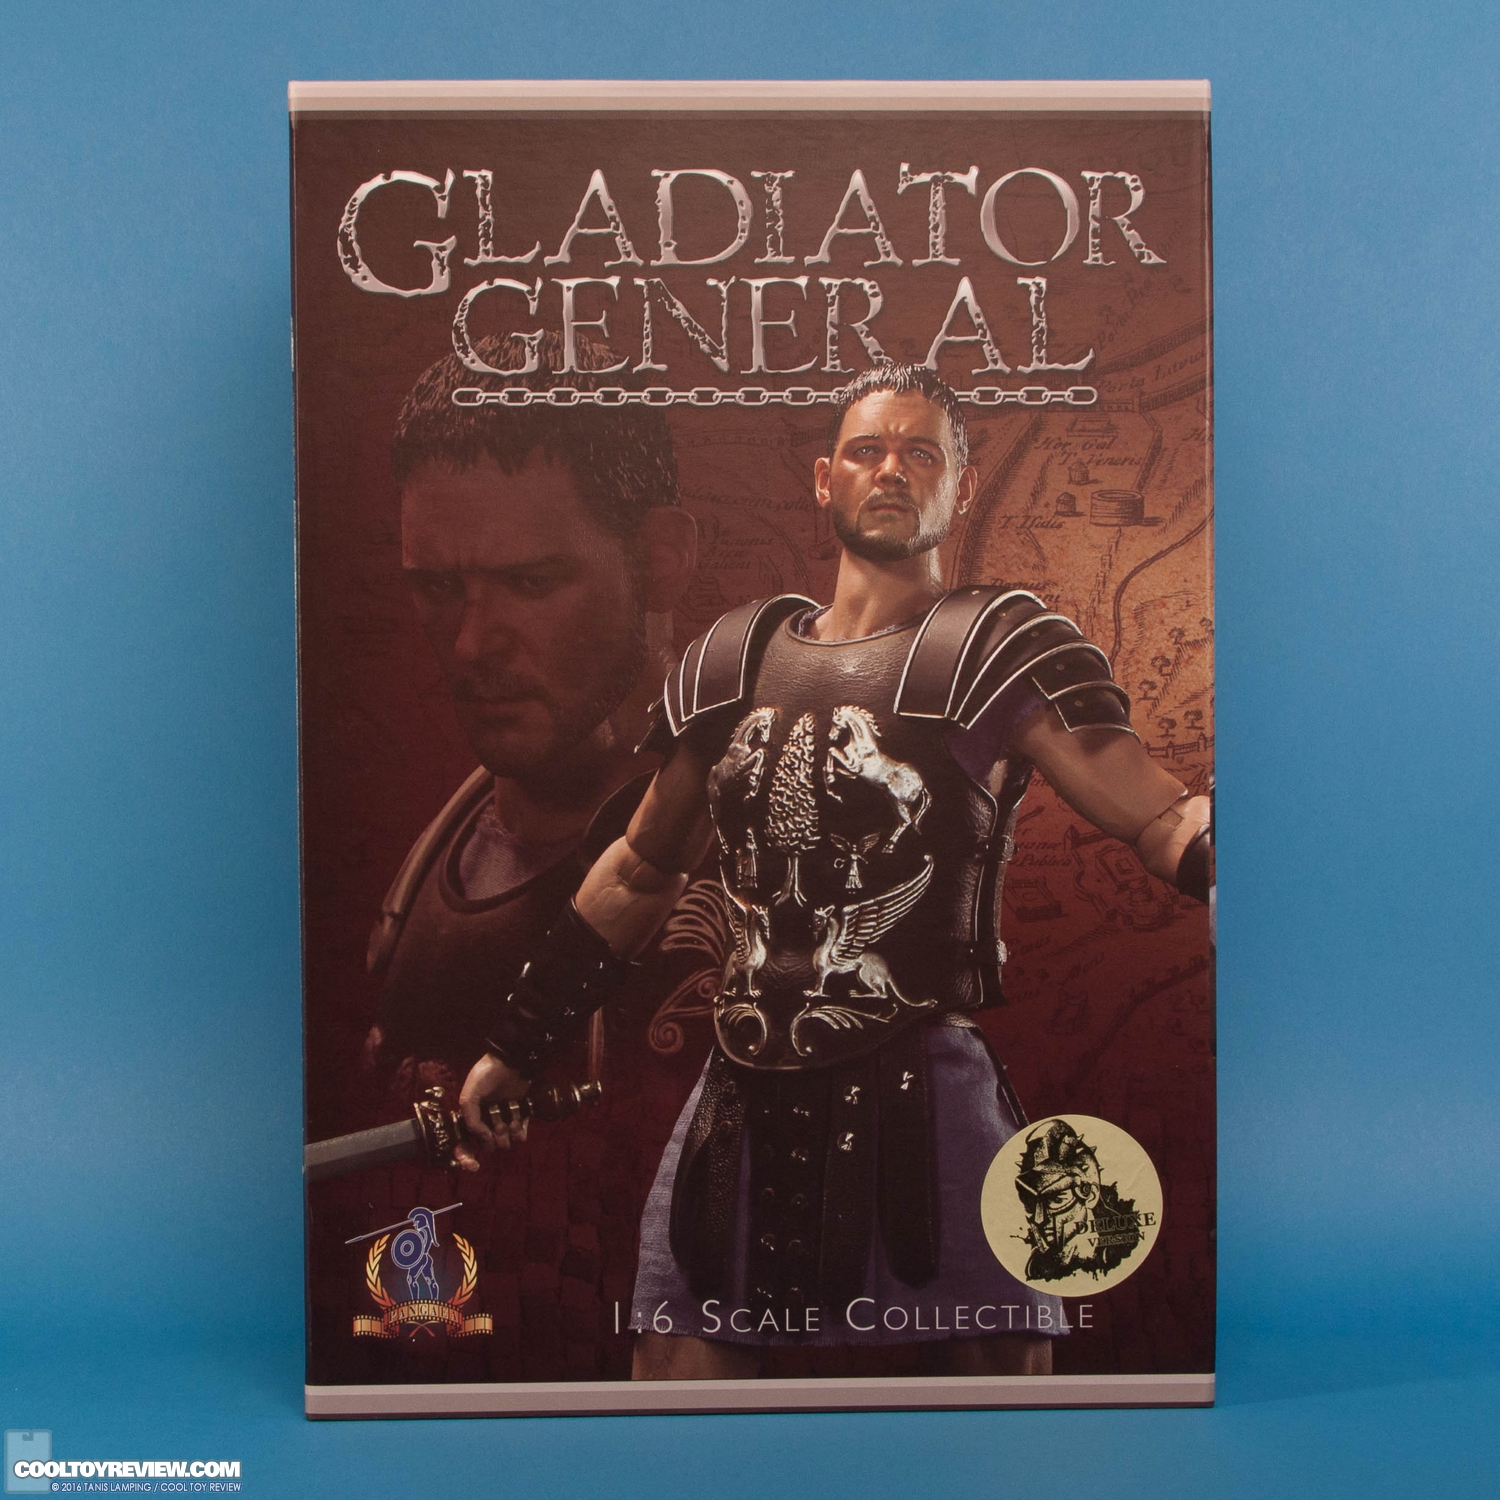 pangaea-toy-gladiator-general-sixth-scale-collectible-figure-069.jpg